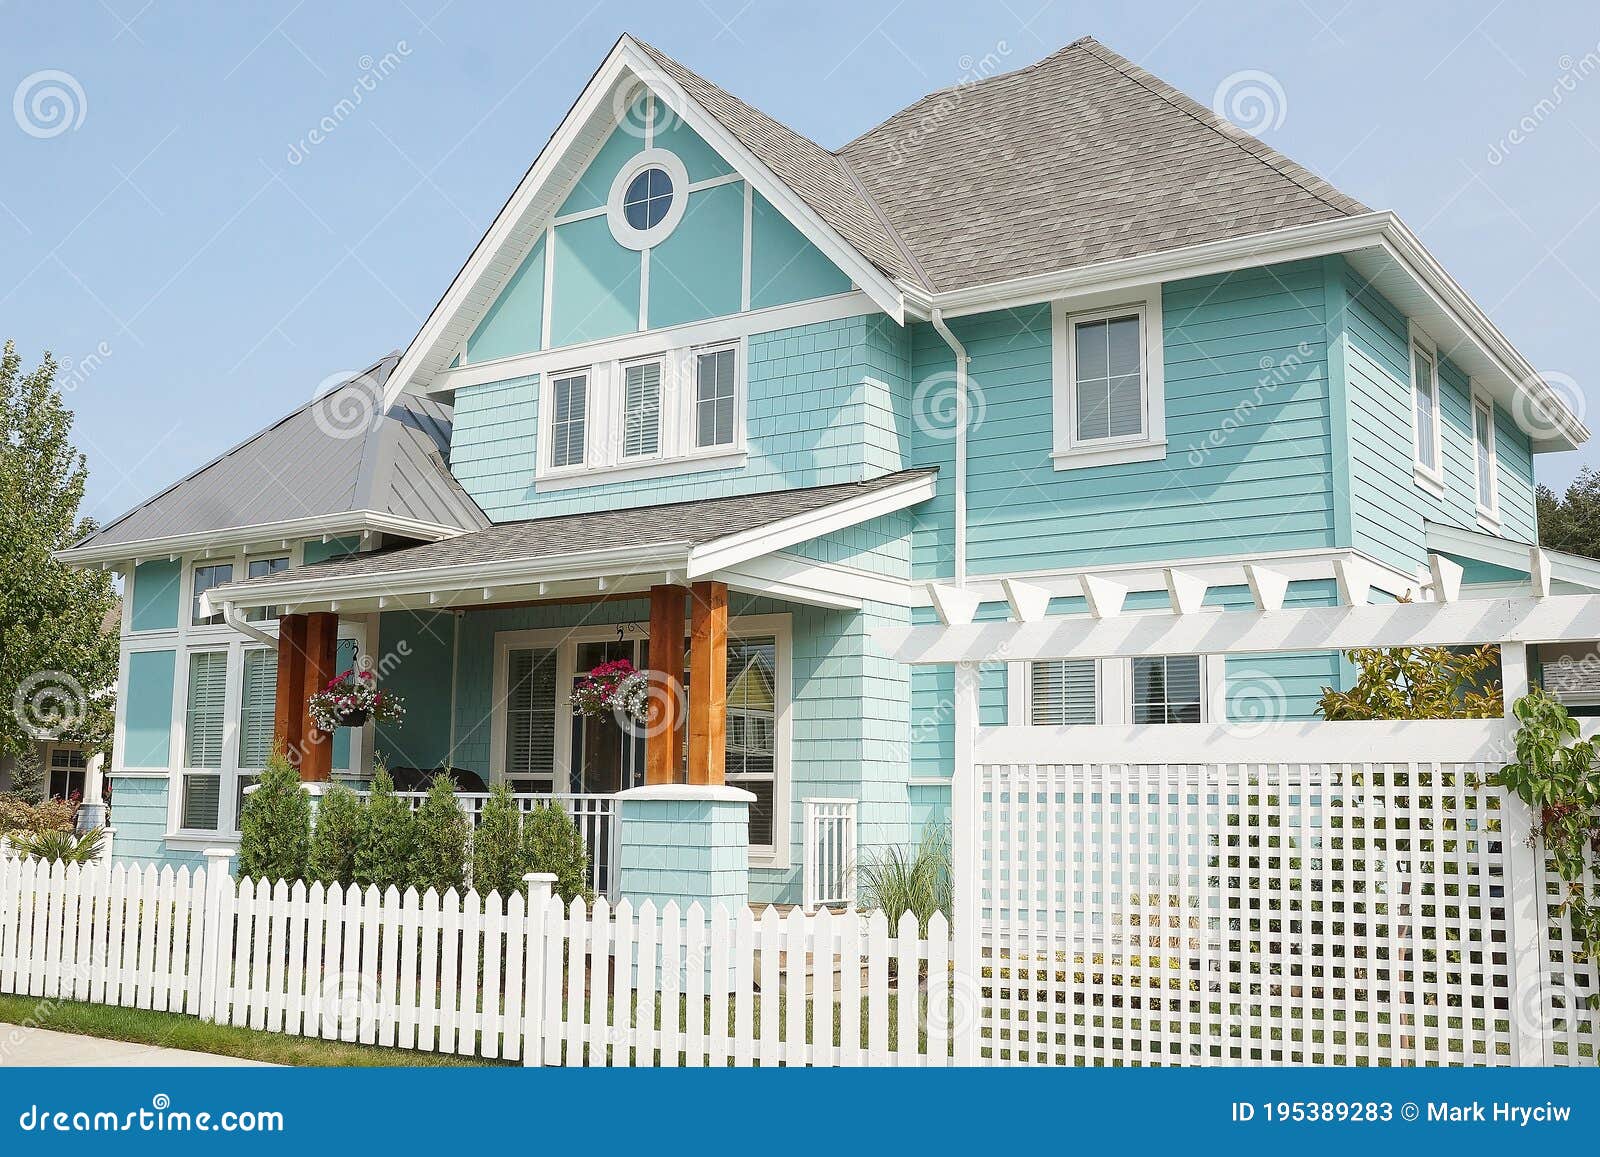 Colourful Light Blue Home House Exterior Details Canada Stock Image - Image  Of Exterior, Detail: 195389283